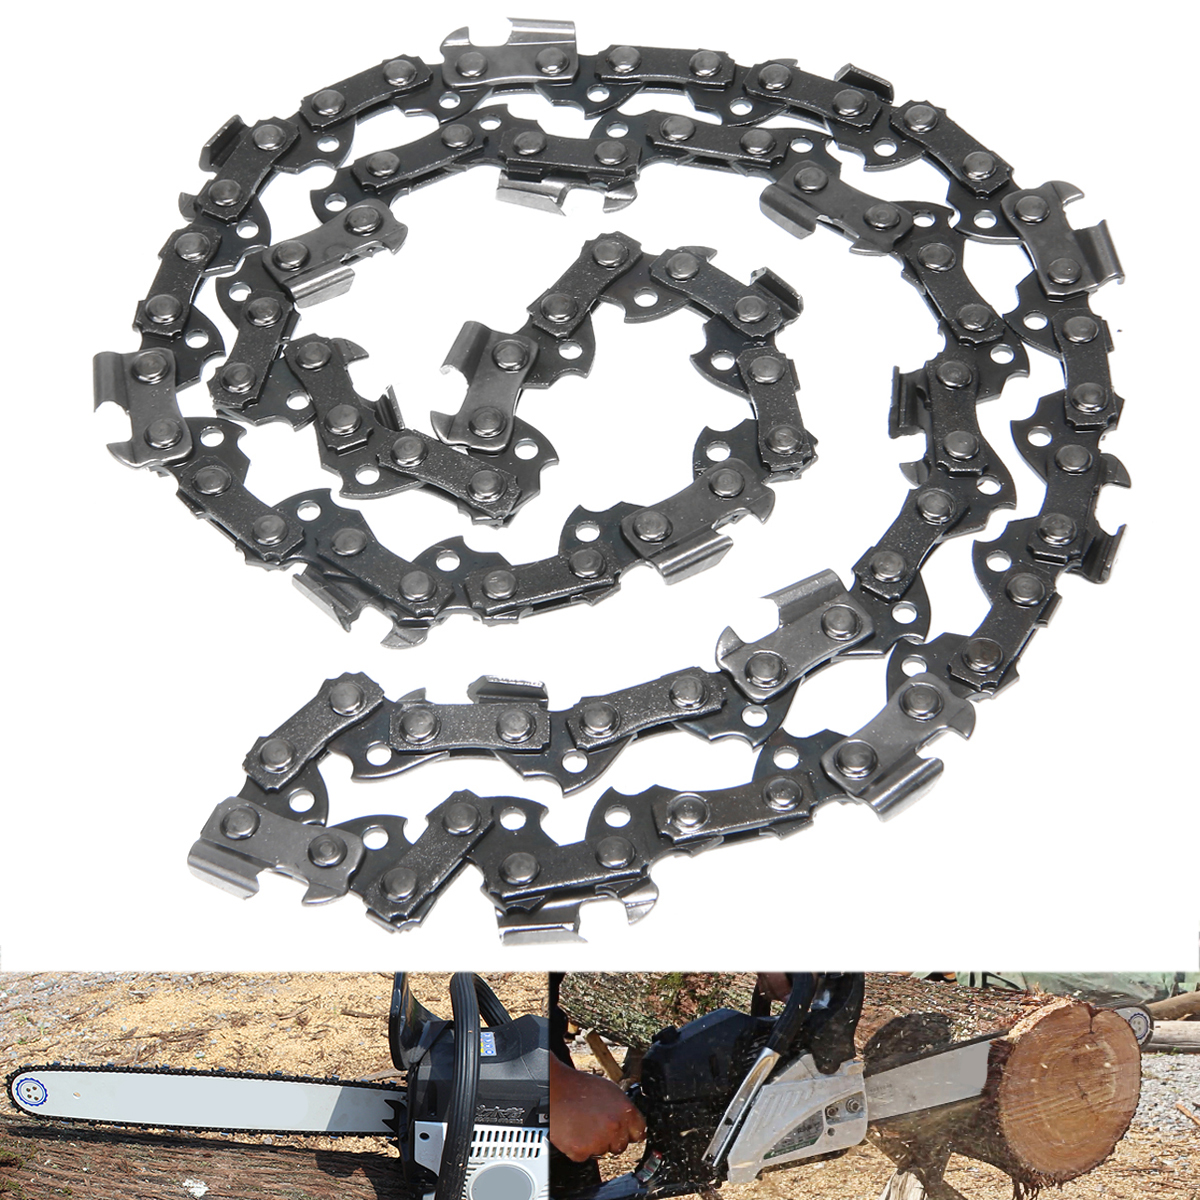 Mayitr 10'' Chainsaw Mill Saw Chain Wood Cutting 40 DL Drive Links 3/8'' Pitch Garden Power Replacement Tools Saw Chain